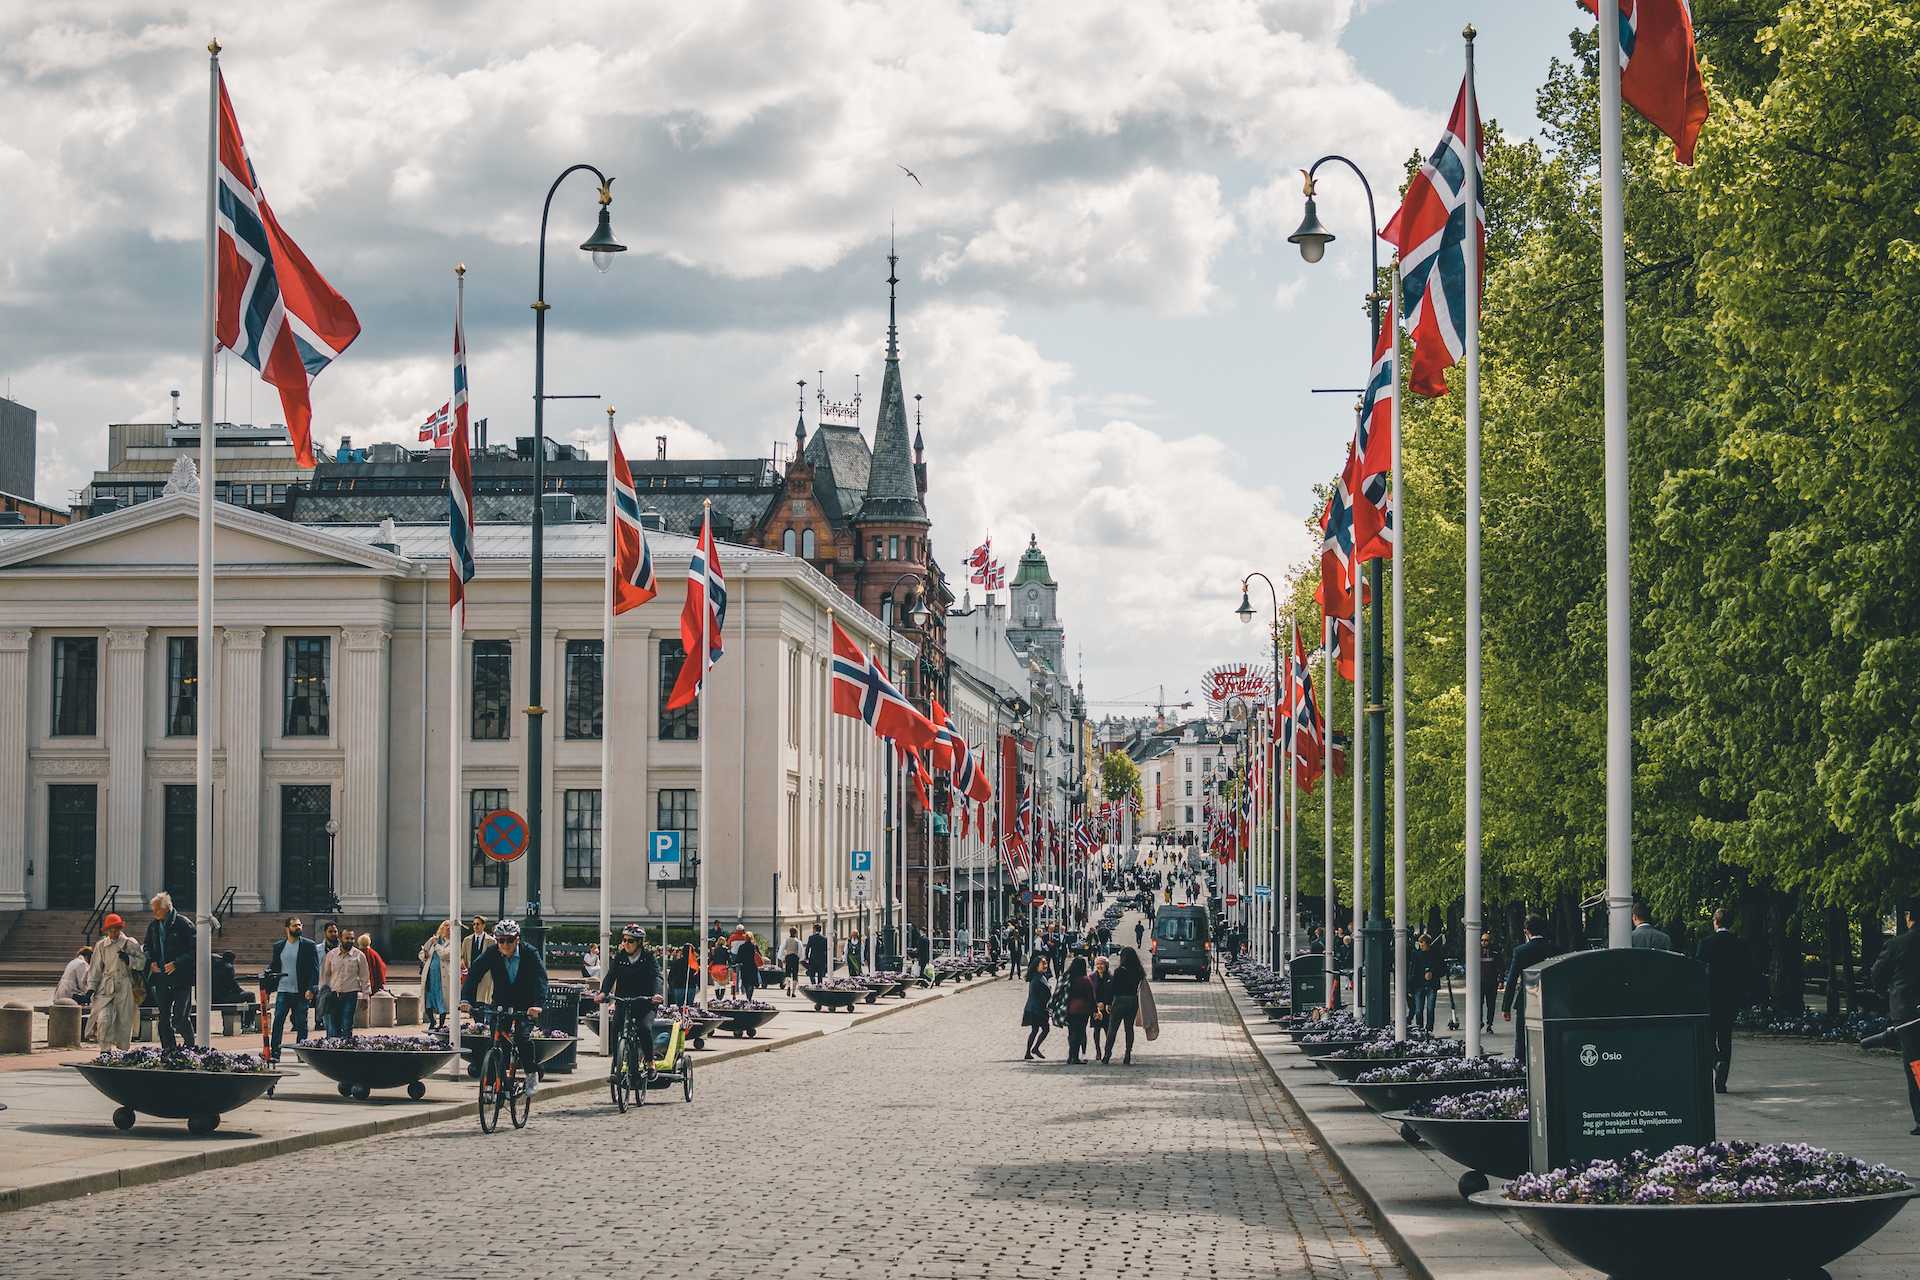 On May 17th, the streets of Norwegian cities are full of national flags (photo: Sylwia Smółkowska / KierunekNorwegia.pl)